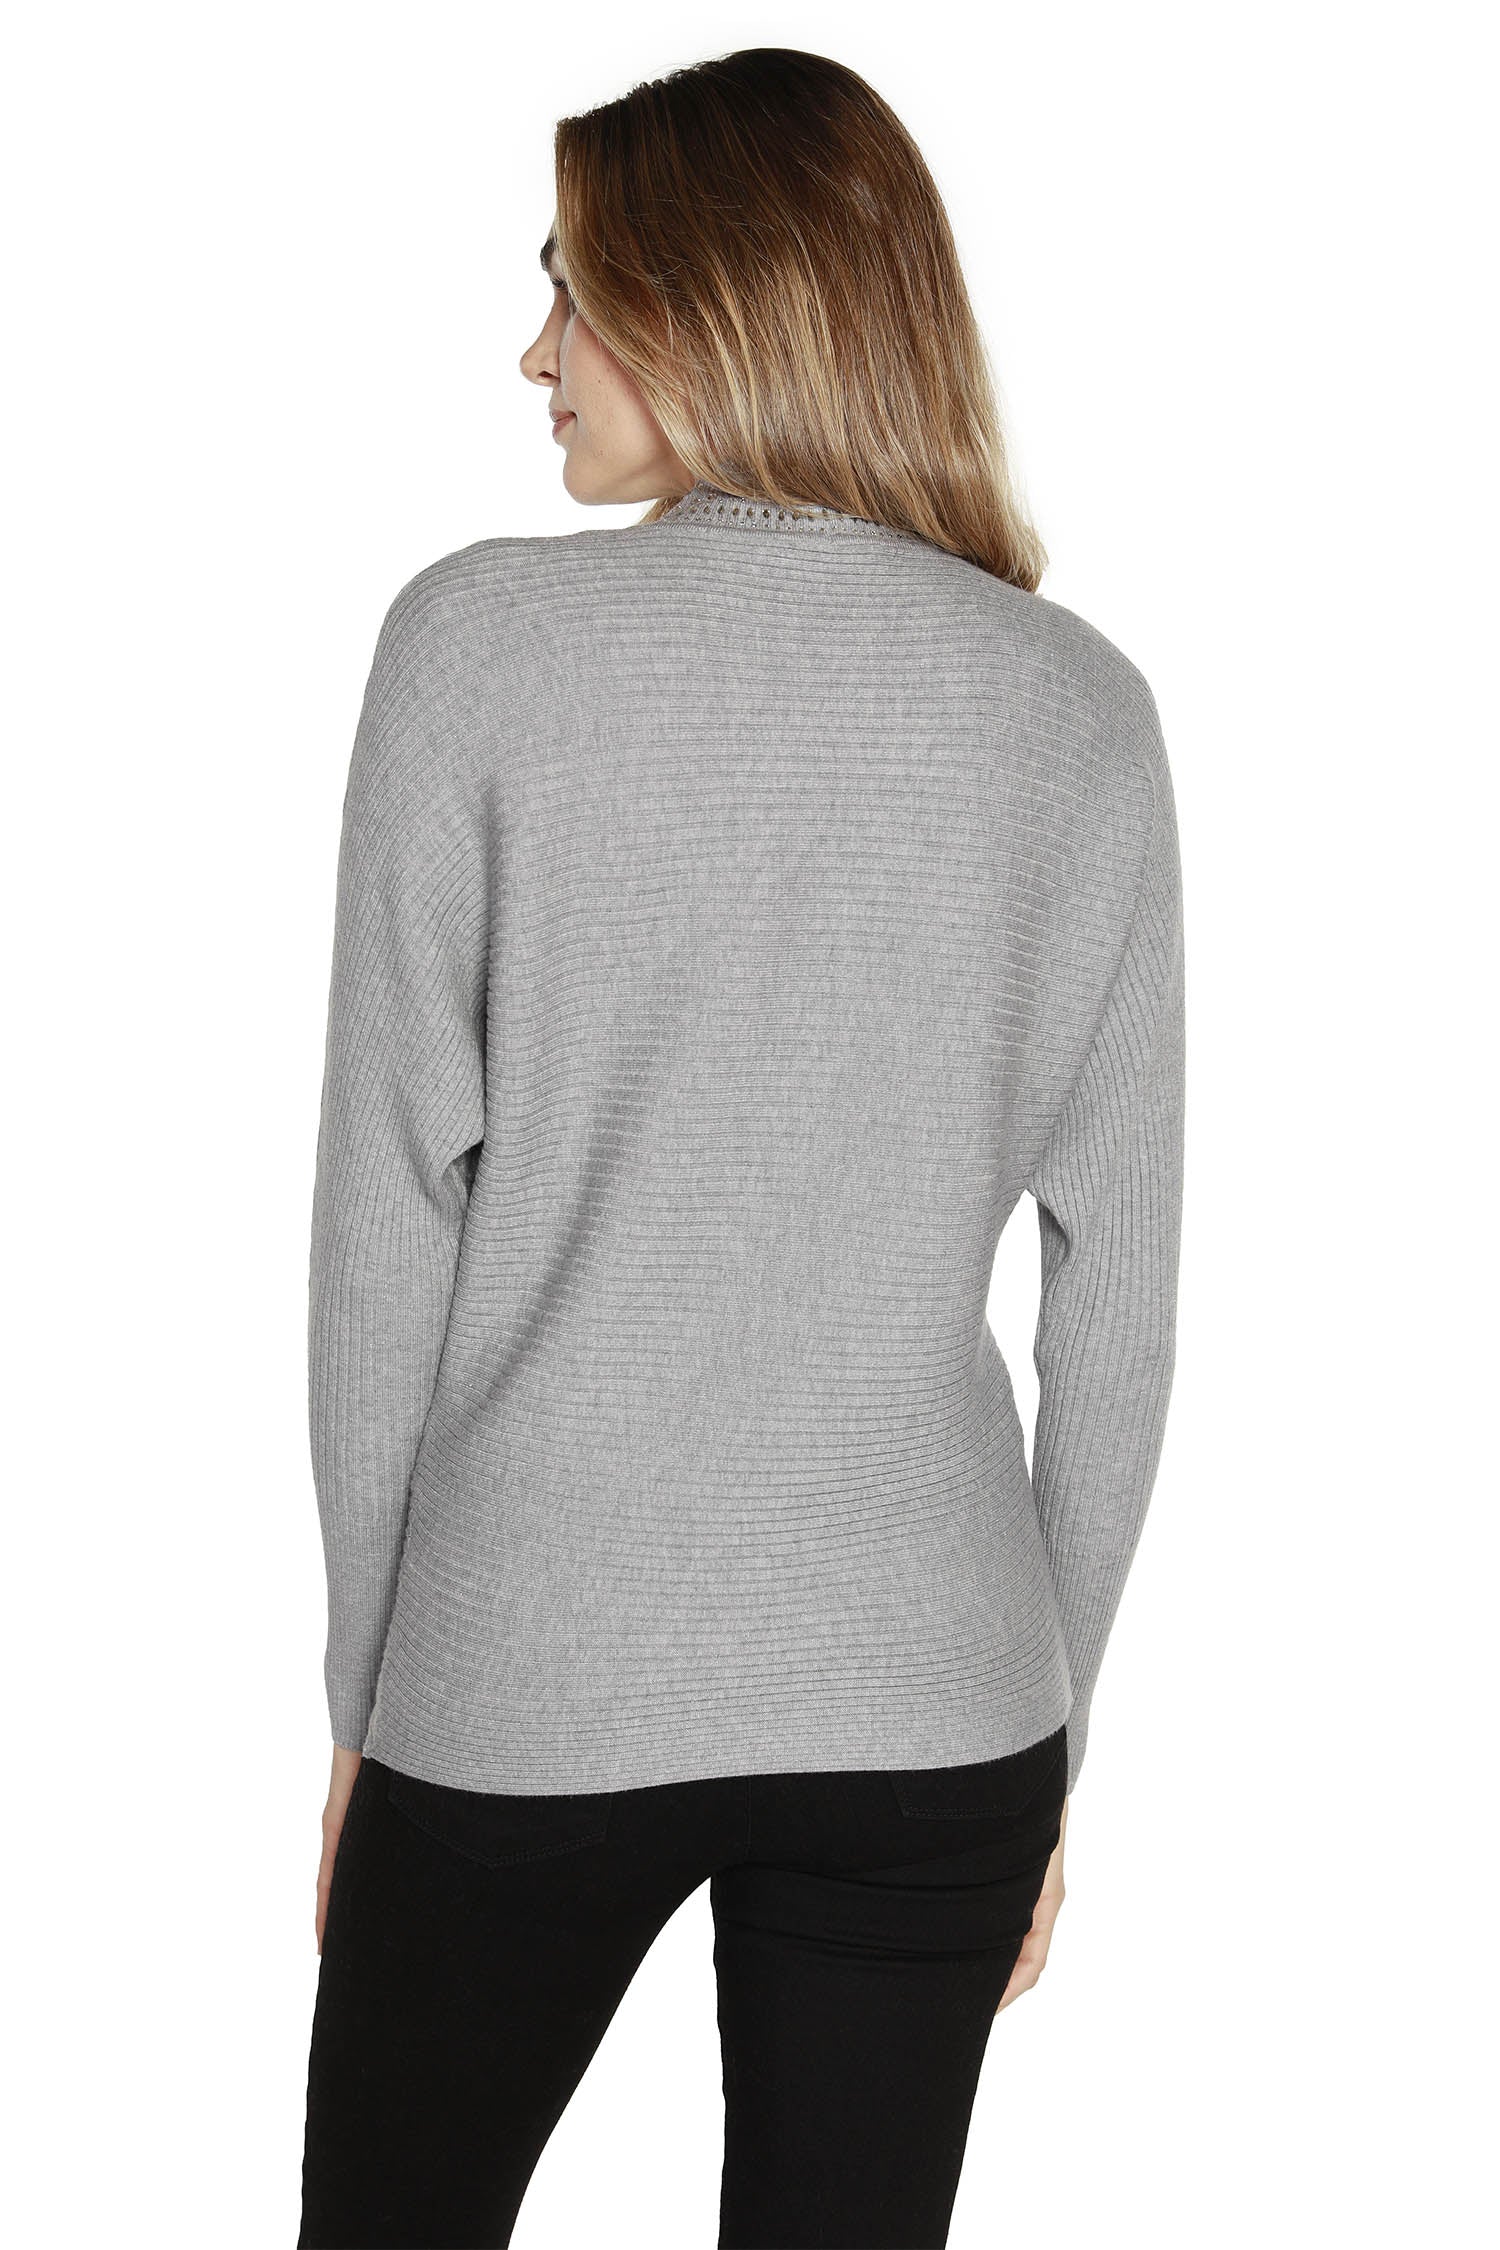 Women's Long Sleeve Sweater in a Ribbed Knit with Dolman Sleeves and Rhinestone Detailed Mock Neck